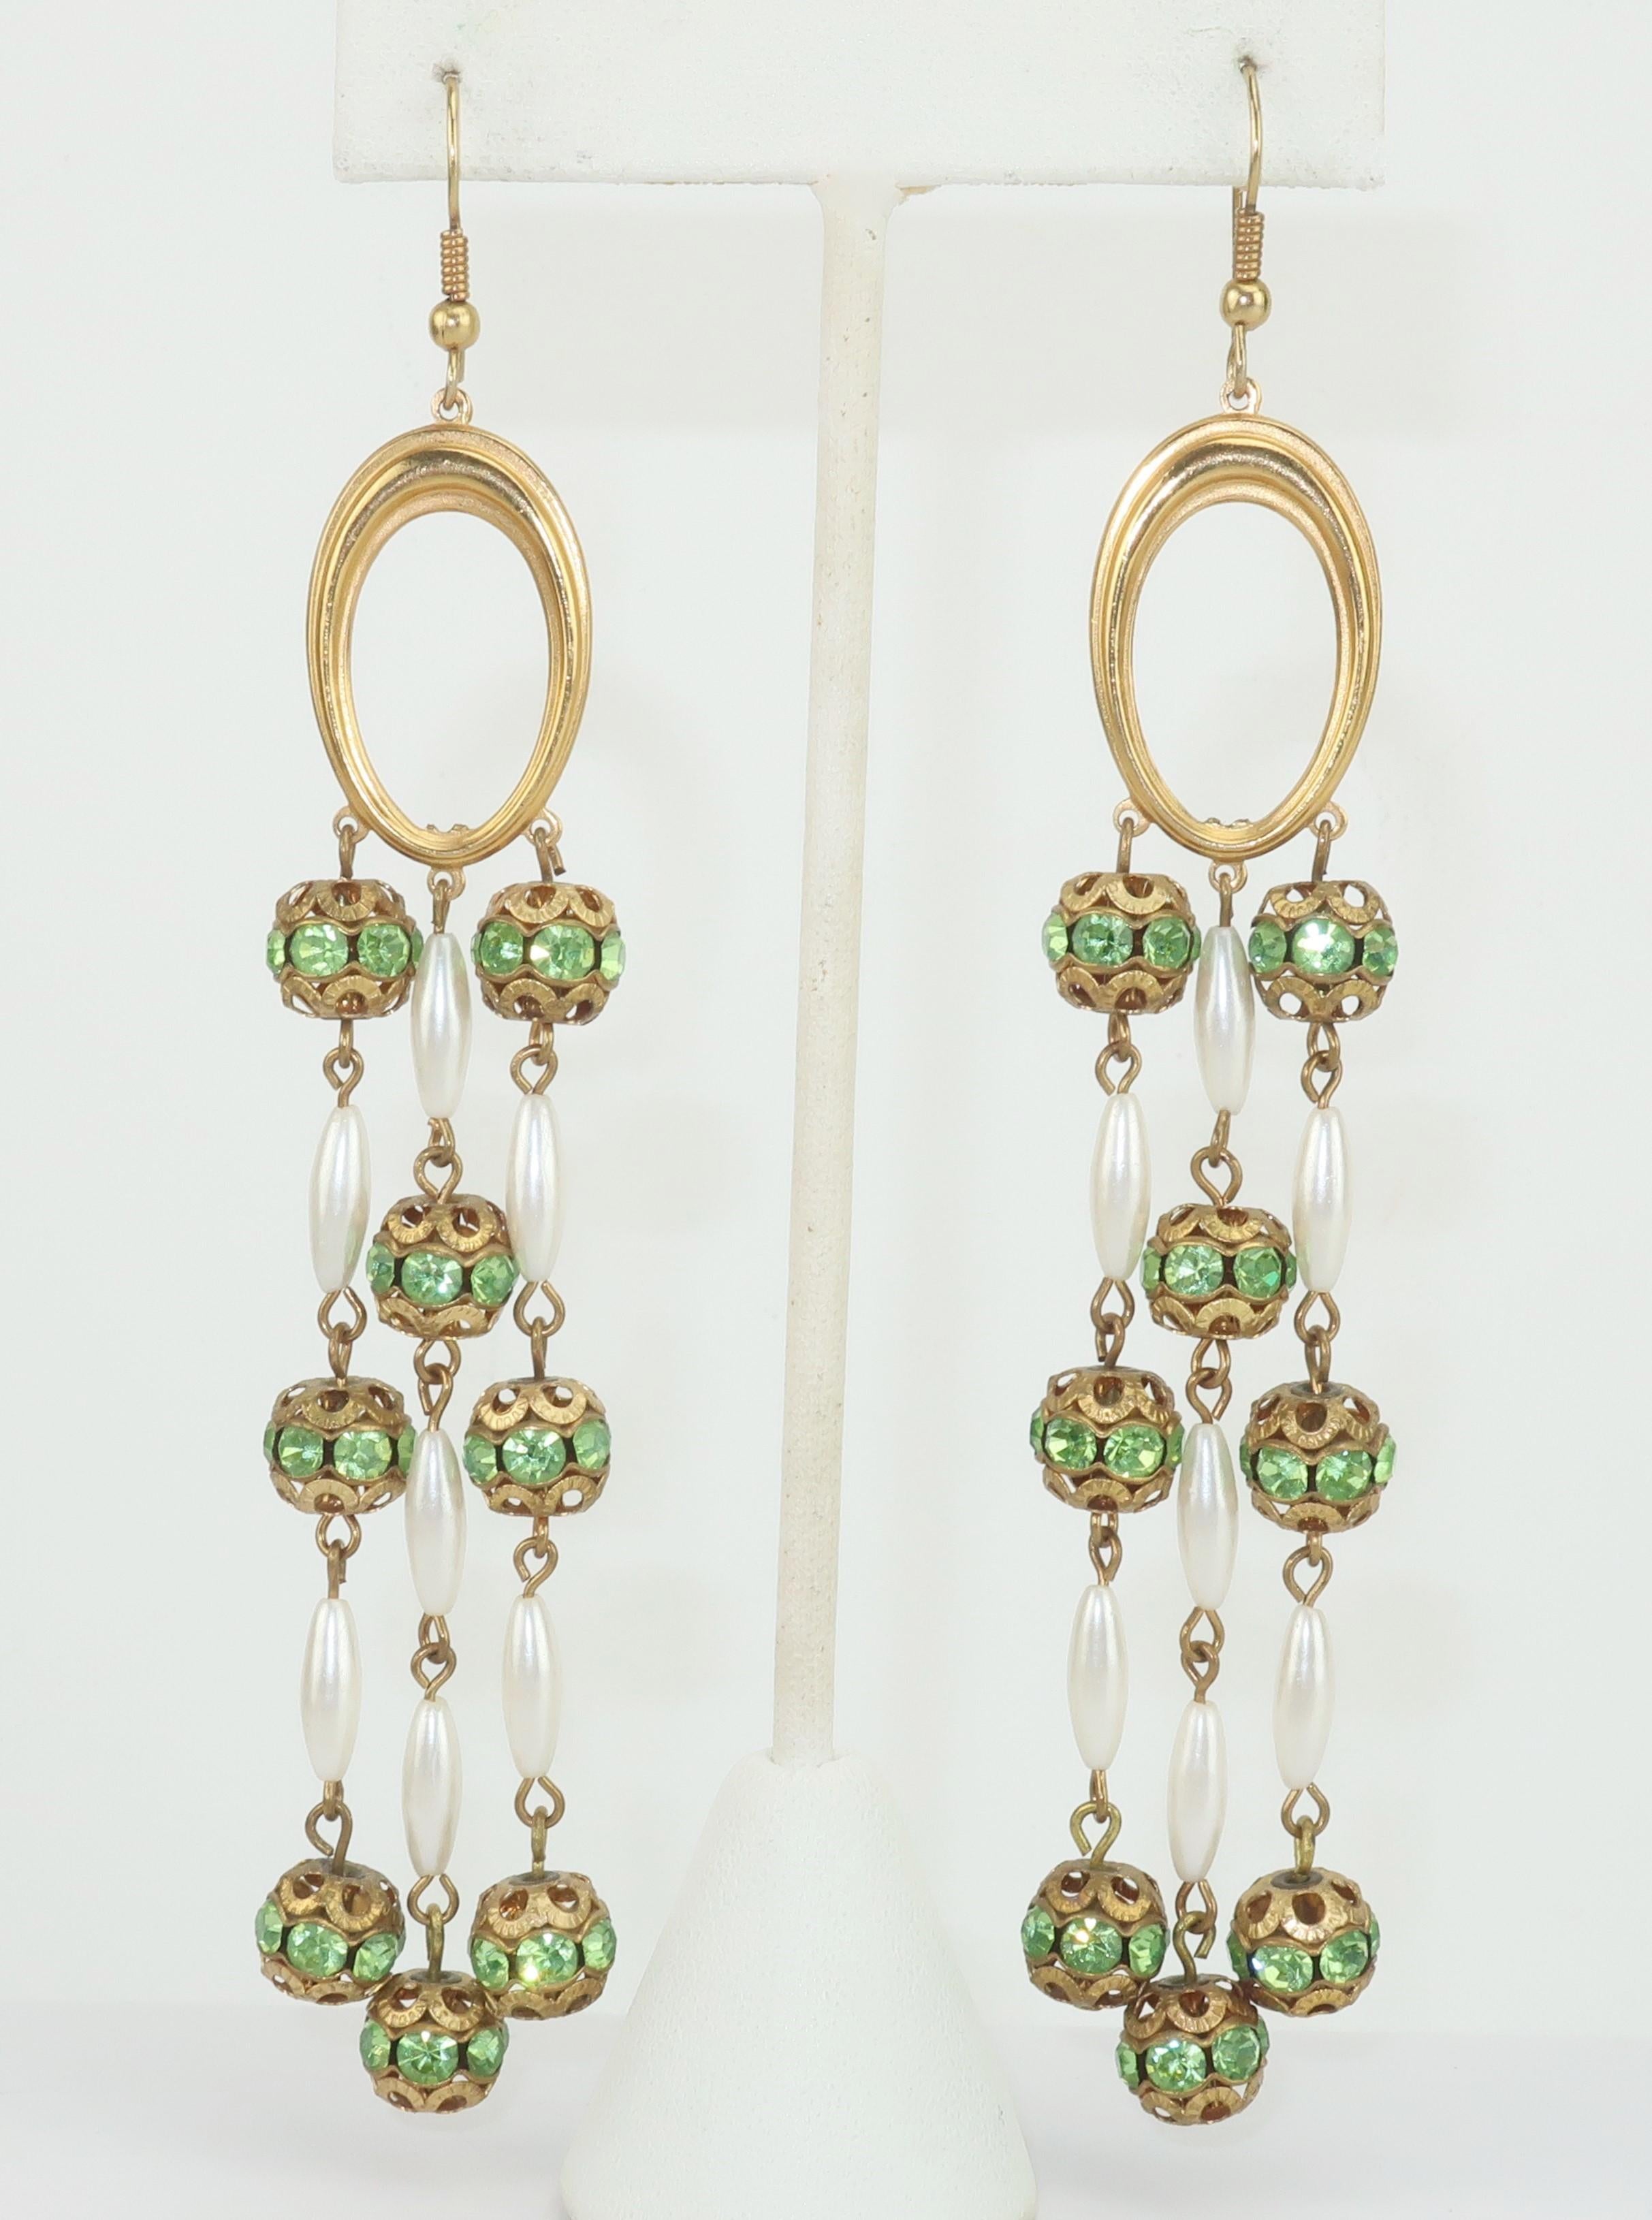 A super long pair of chandelier earrings are the perfect way to add a touch of glamour to your look.  These danglers consist of an oval gold tone hoop base with strands of filigree beads embellished with green rhinestones and mixed with pearl beads.